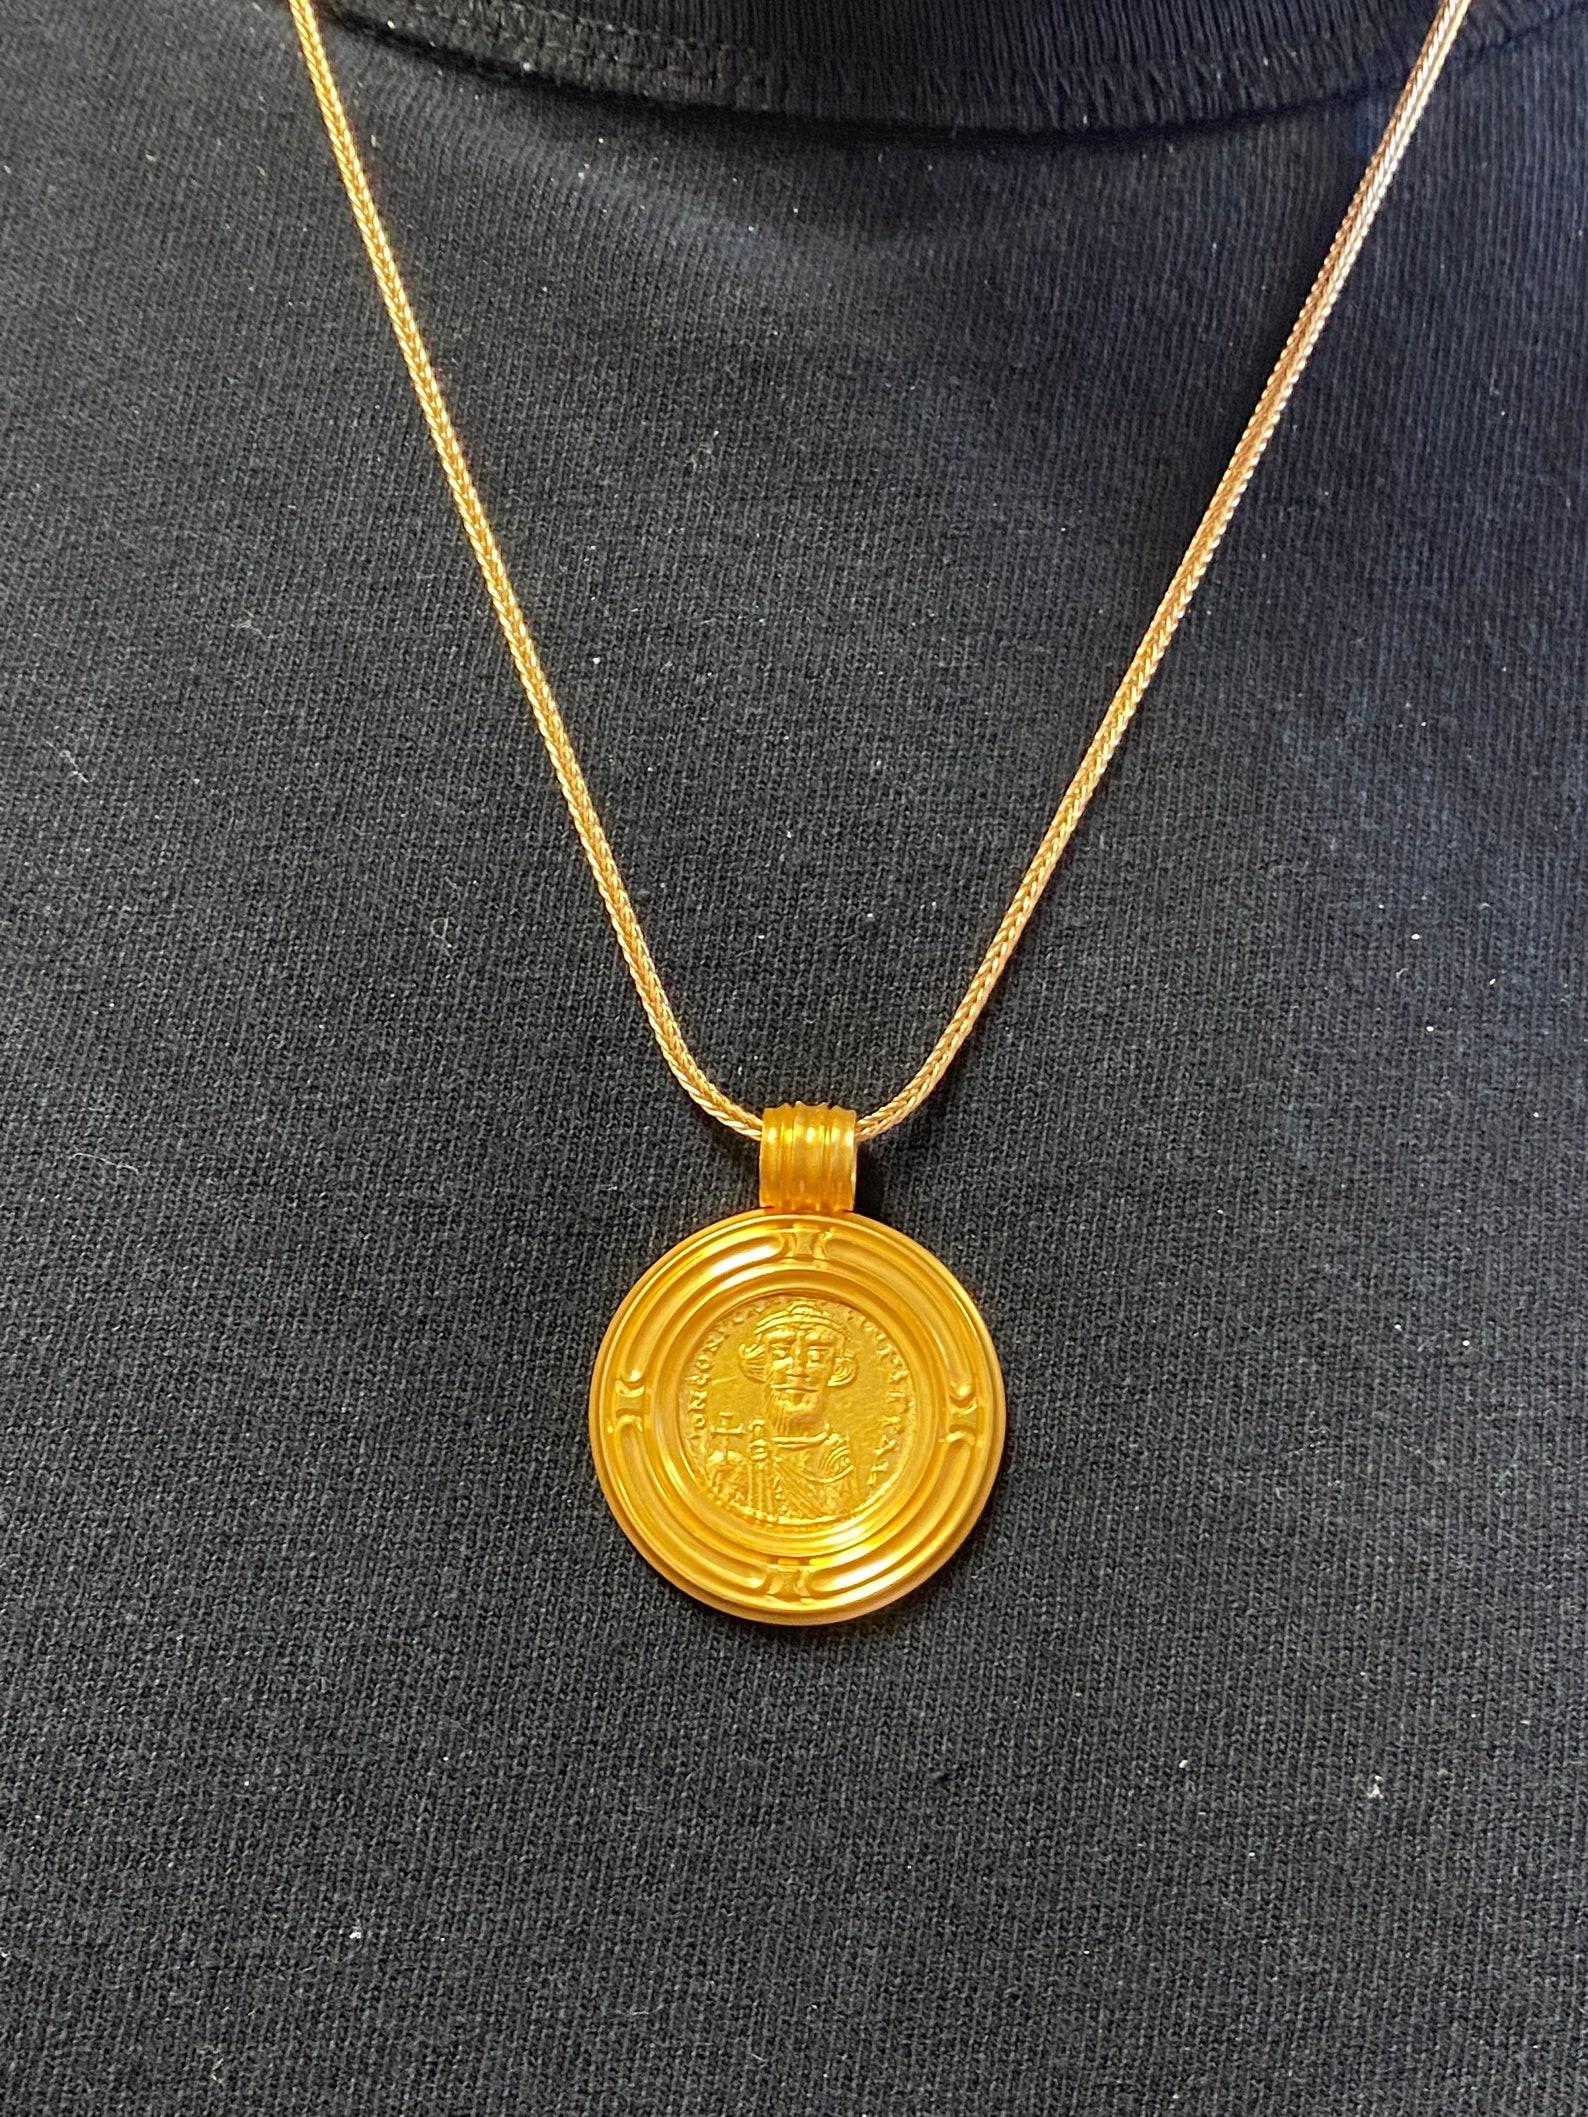 Women's or Men's 22K Ancient 7th Century Byzantine Constans II Gold Coin Pendant For Sale